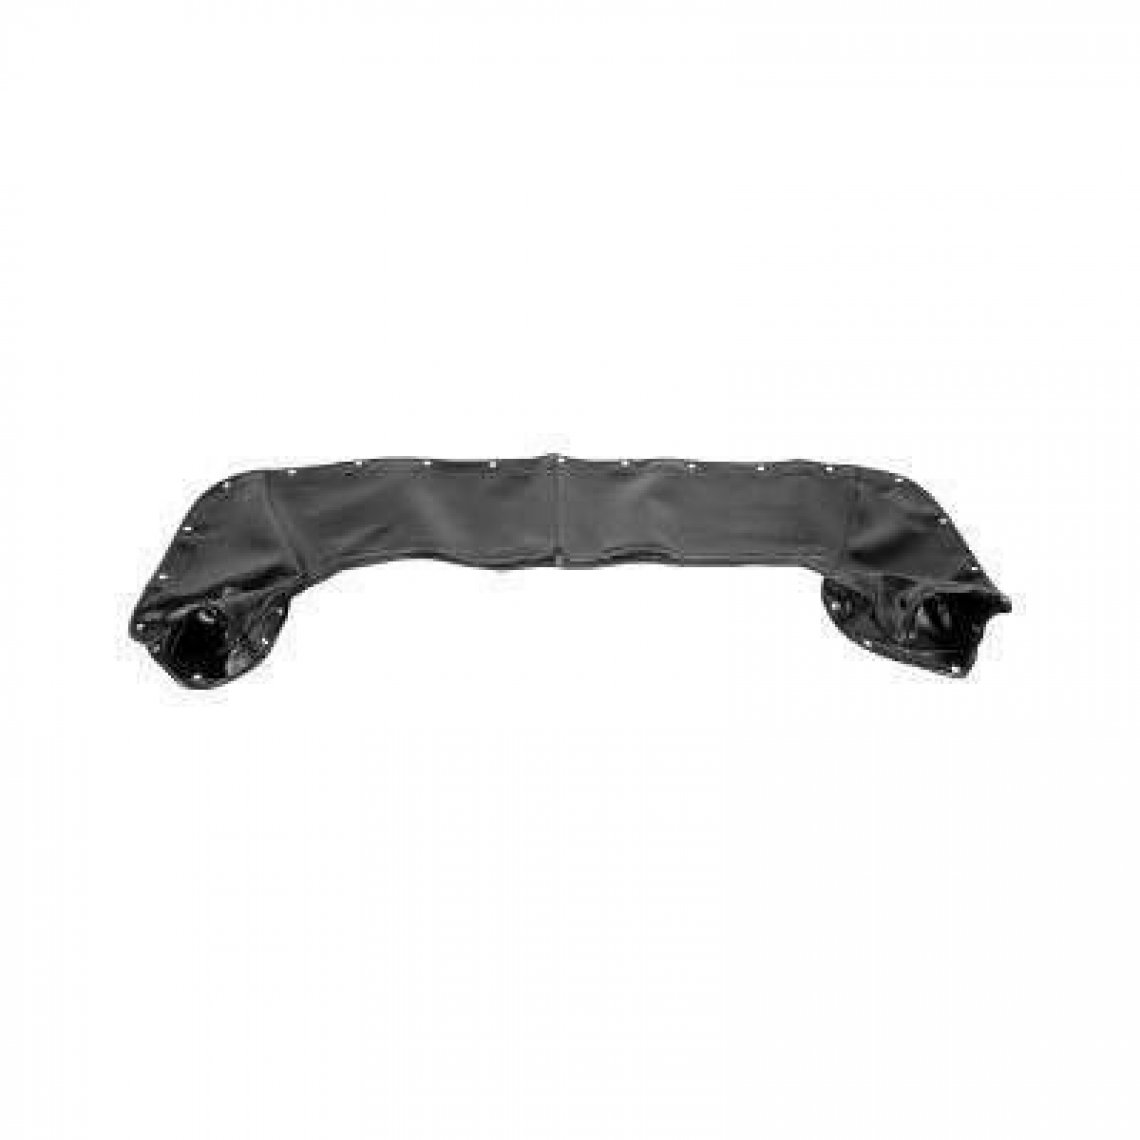 Convertible top cover Ford Mustang 6566, black leather